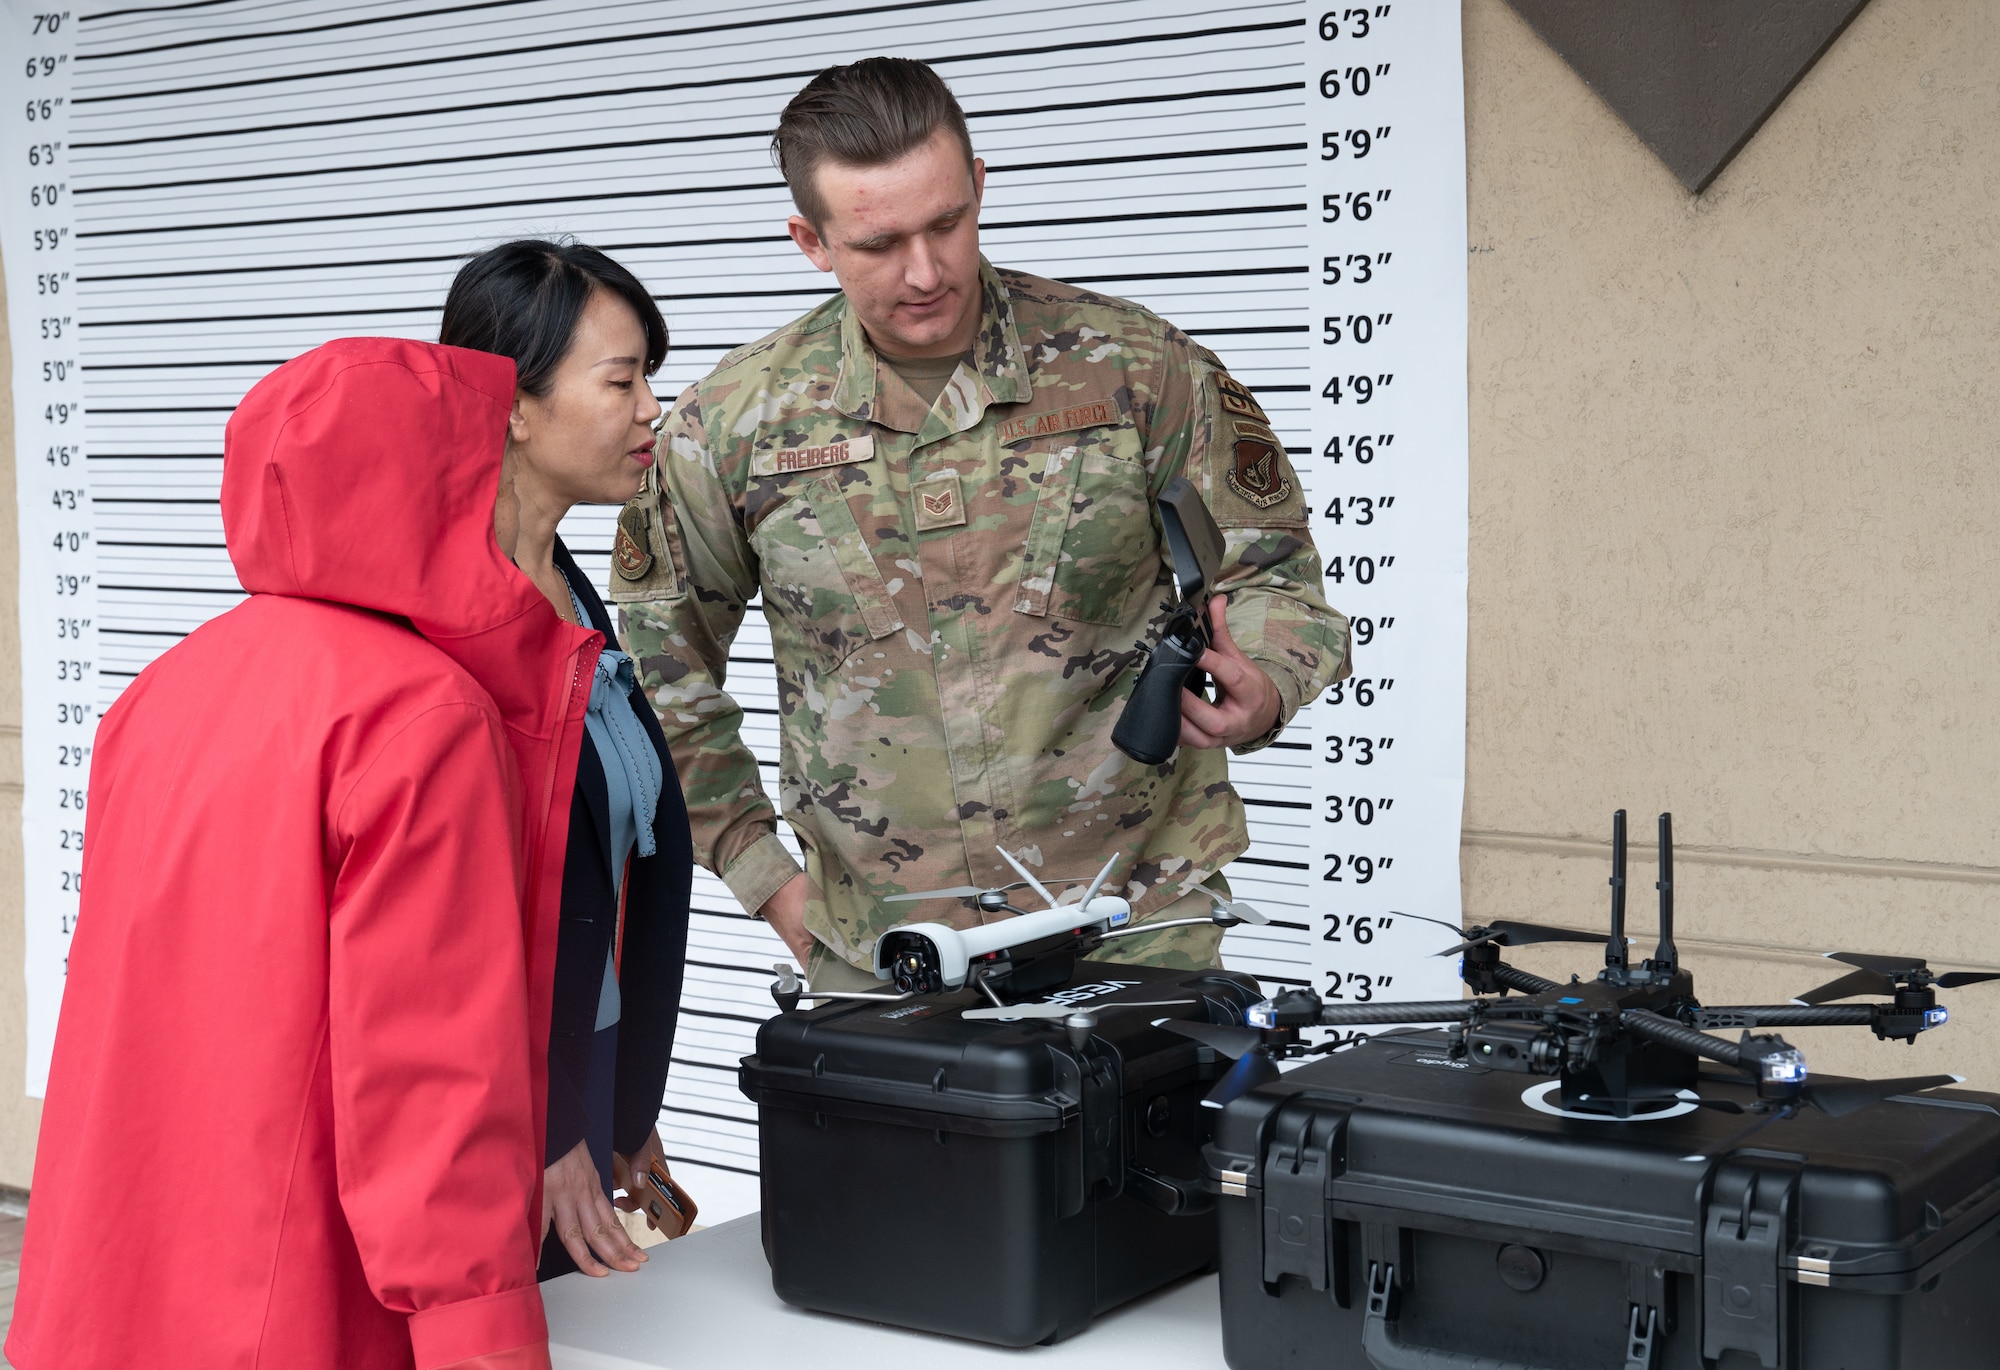 Two Korean nationals look at small-unmanned aircraft systems with Staff Sgt. Zackery Freiburg, 8th Security Forces Squadron NCO in charge of sUAS, during the 2023 National Police Week demonstration at Kunsan Air Base, Republic of Korea, May 22, 2023. During the demonstration, visitors could ask questions and get an inside look at some of the tactics, techniques and procedures used to defend the base. (U.S. Air Force photo by Staff Sgt. Sadie Colbert)